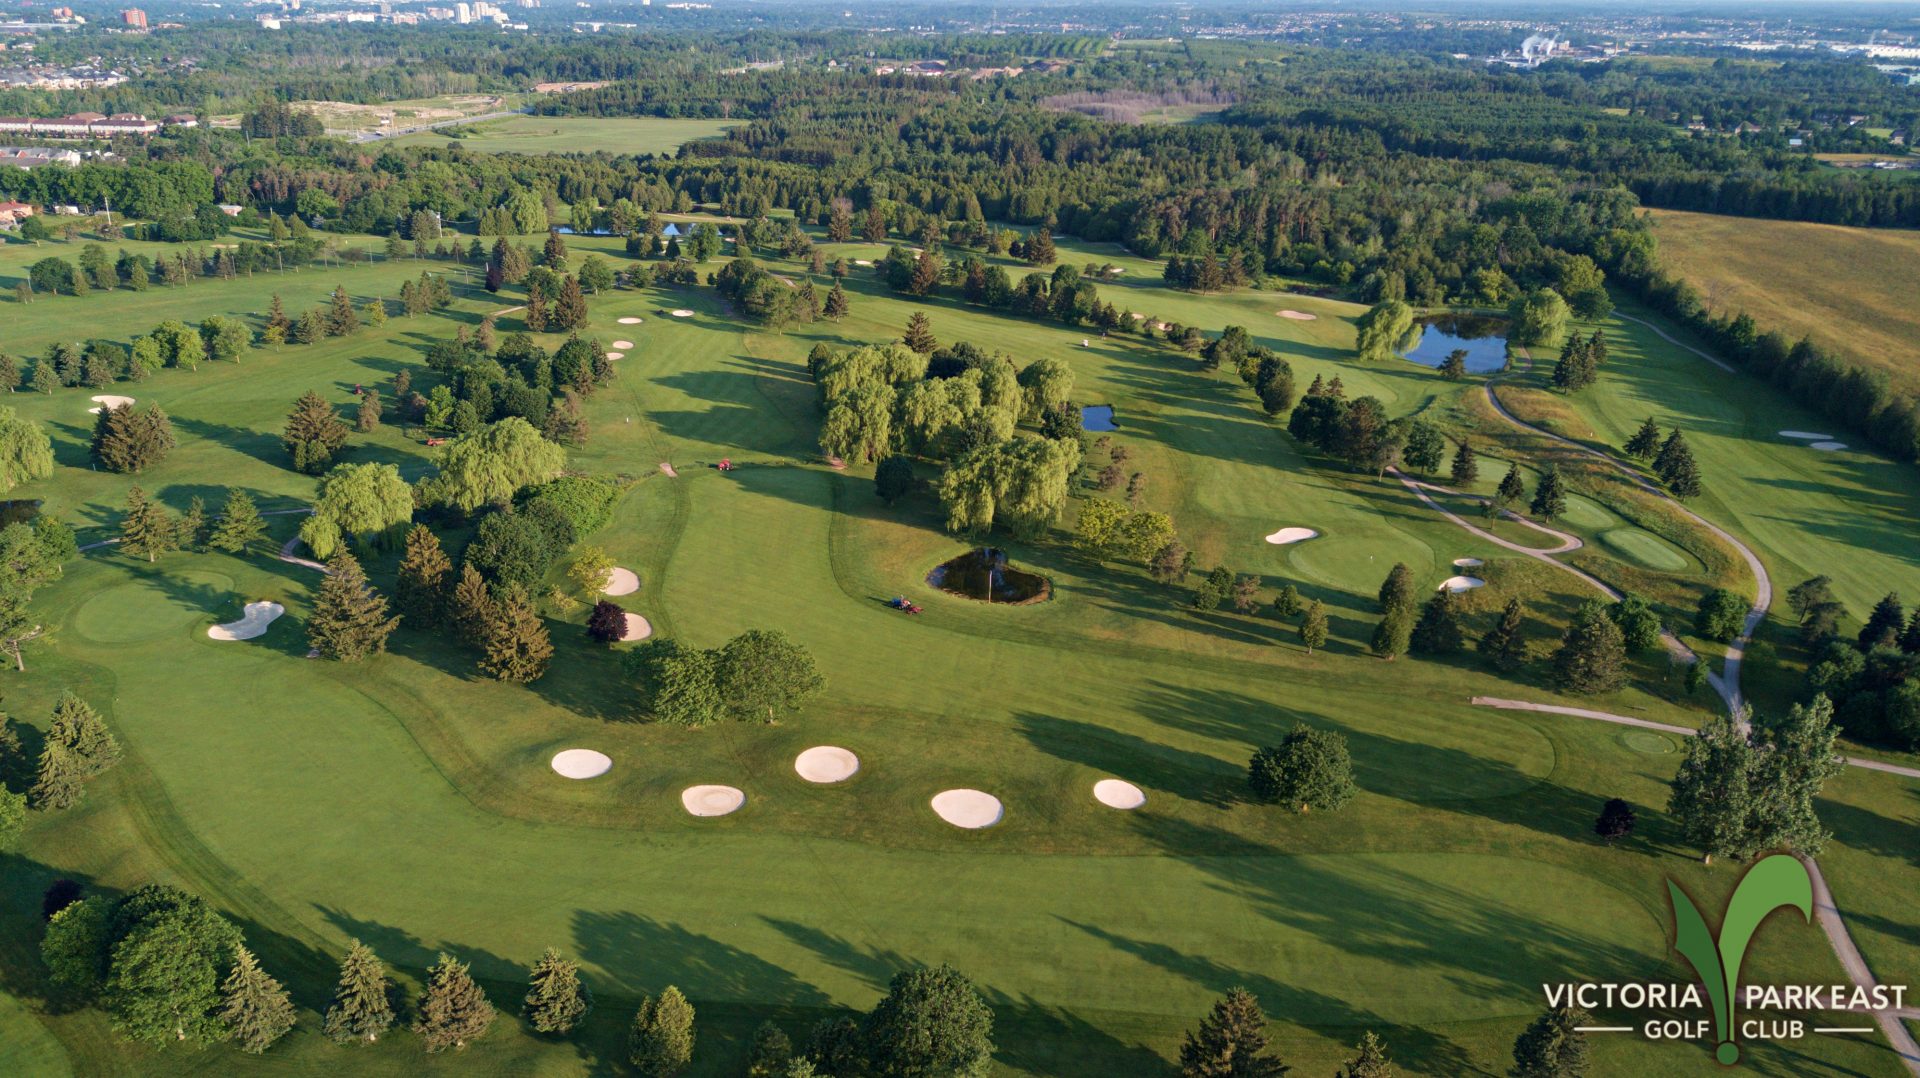 Victoria Park East Golf Club photo from above